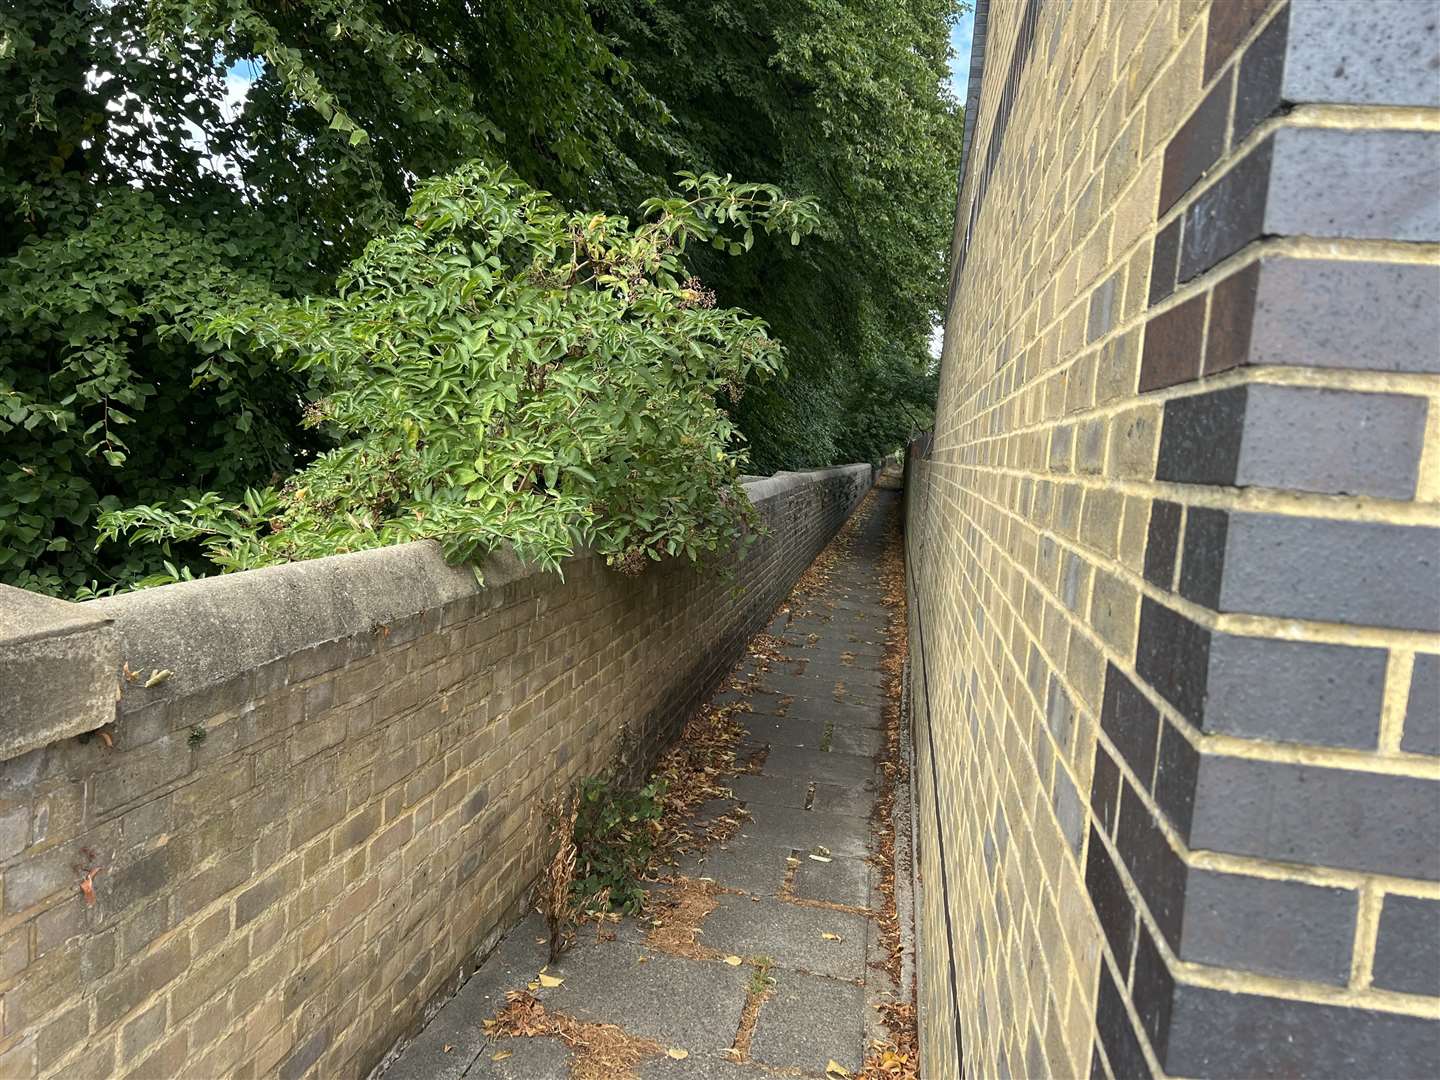 The alleyway running between the rear of Layfield Road and Gillingham Green